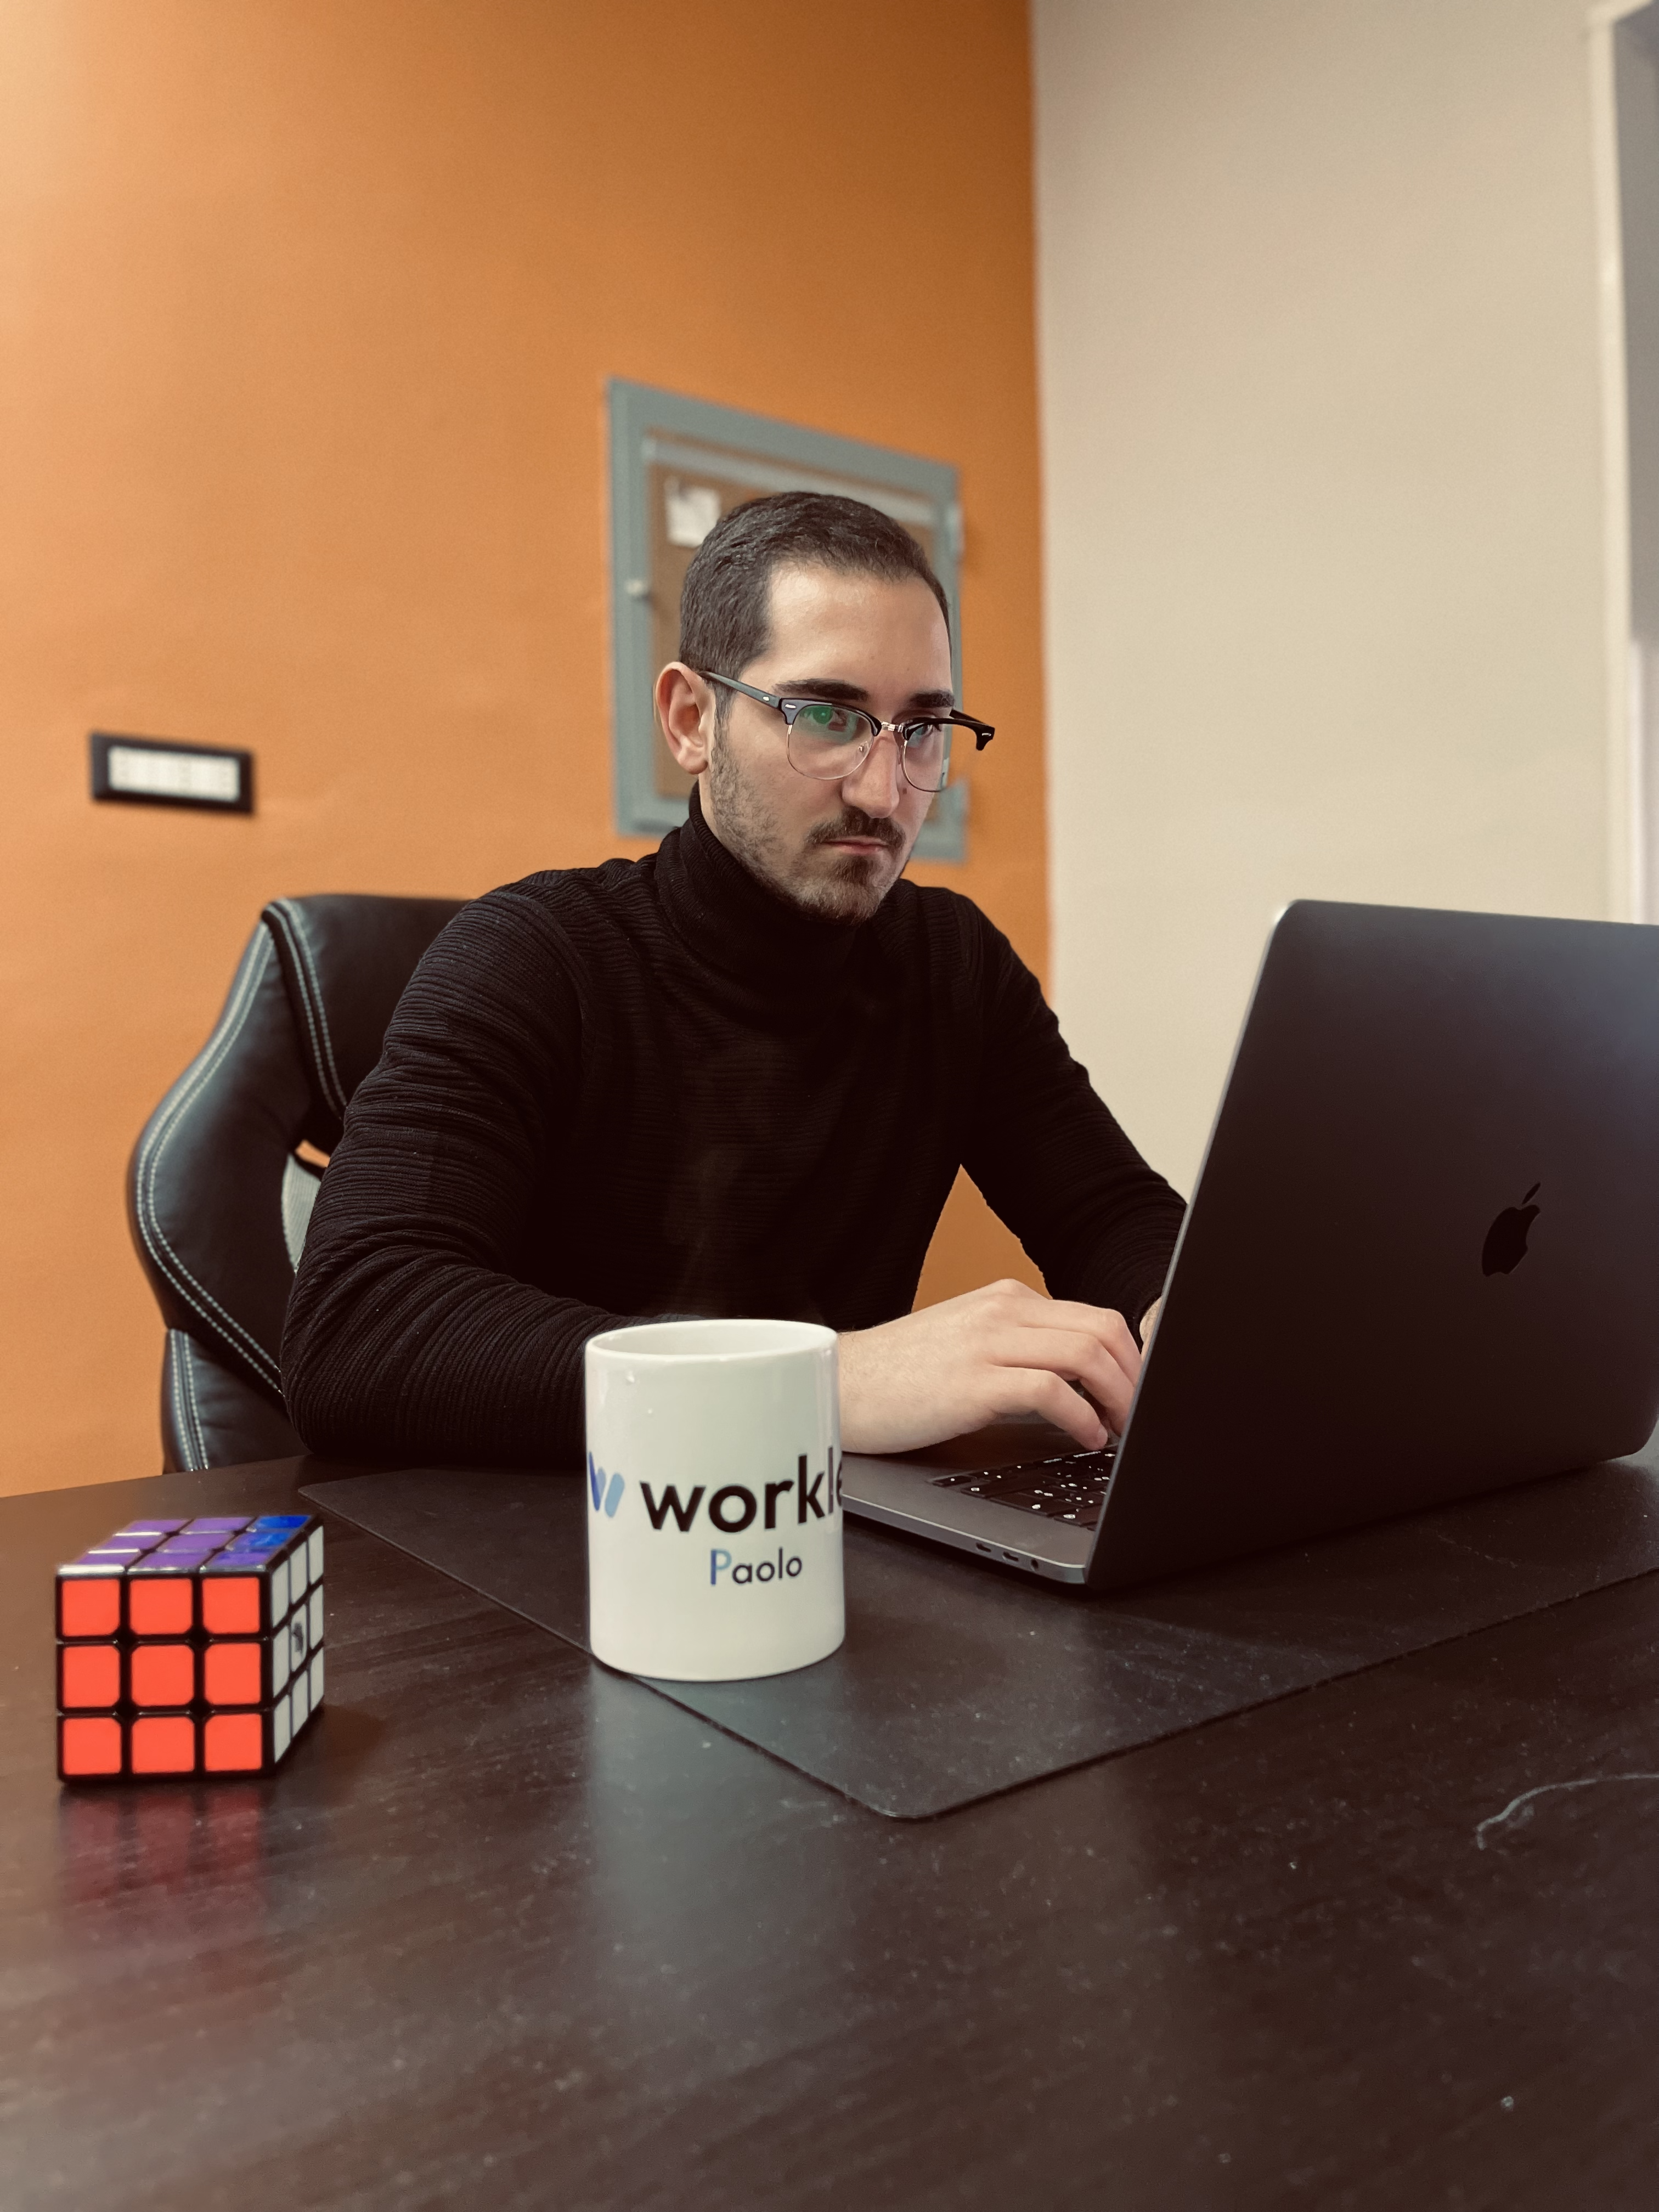 Interview with Paolo Baldo Luchini, CEO of Worklet